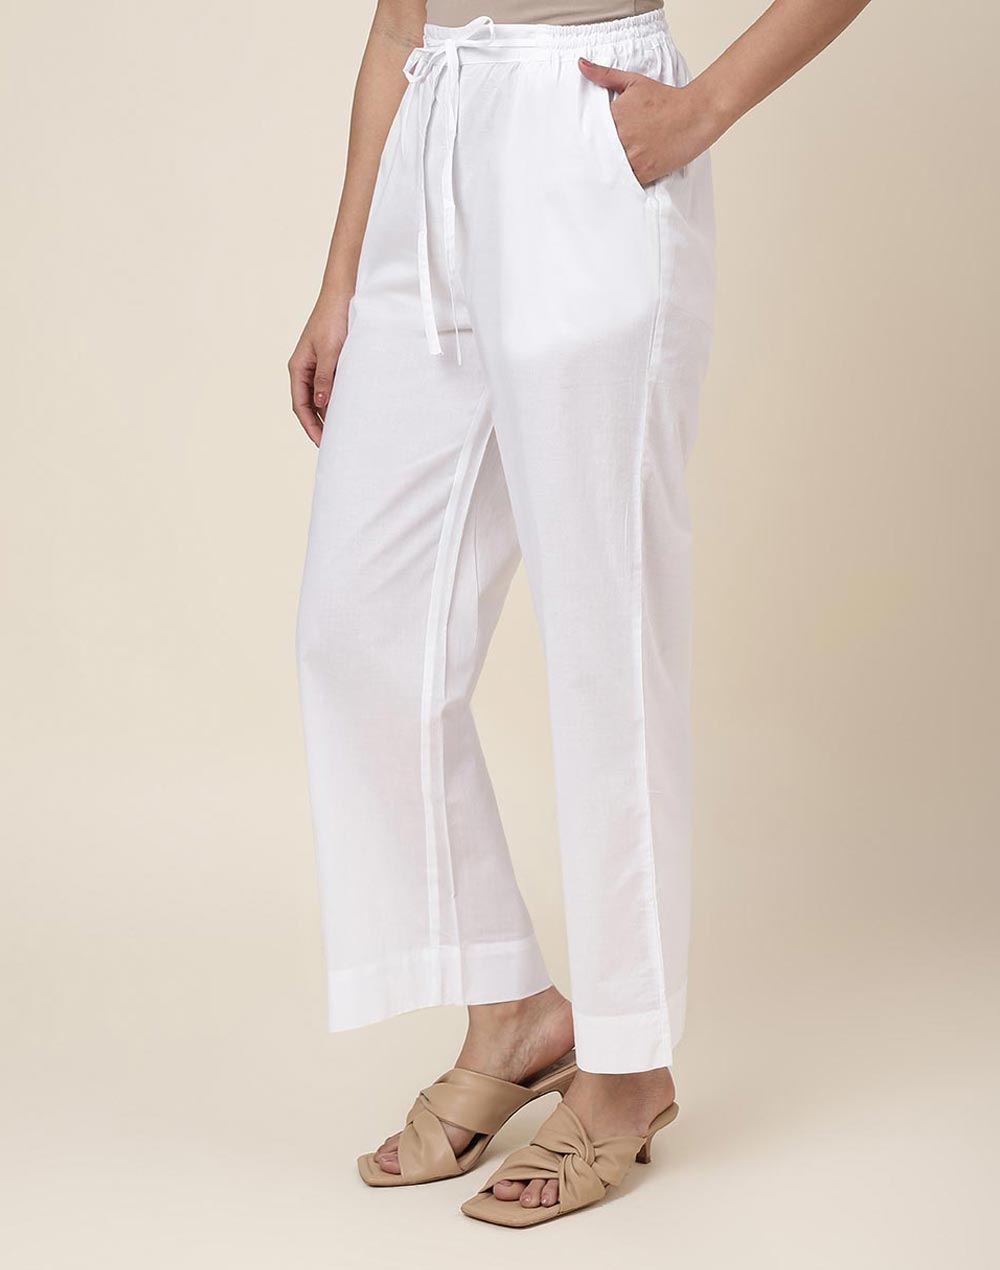 White Cotton Ankle Length Tapered Casual Pant